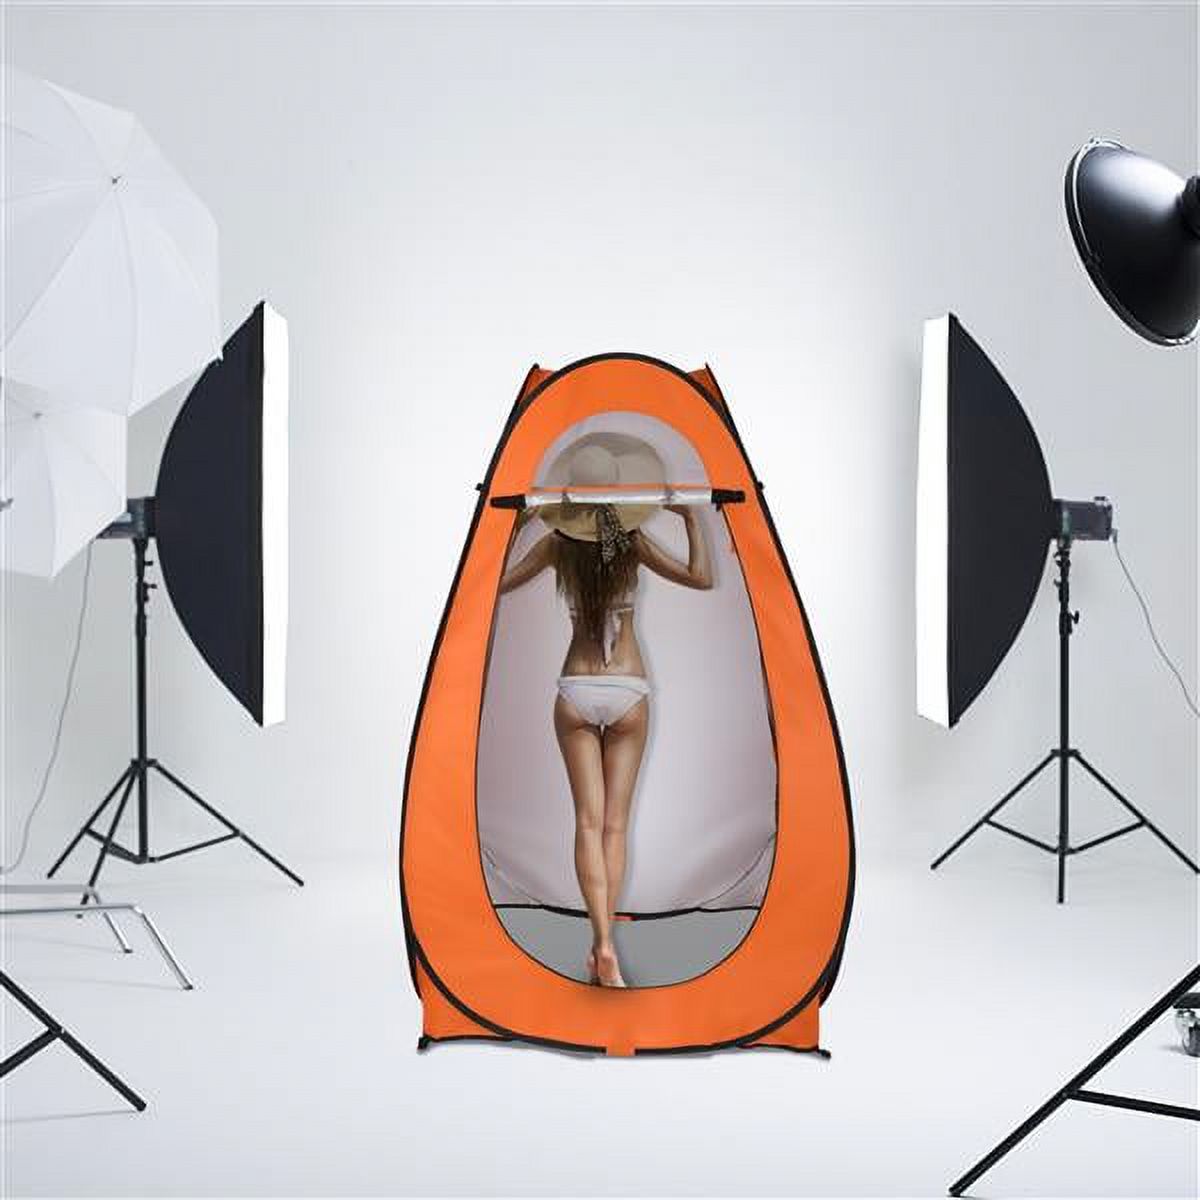 Goorabbit Shower Tents For Camping Pop-Up Privacy TentPortable Shower Tent Outdoor Camp Bathroom Changing Dressing Room Instant Privacy Shelters for Hiking Beach Picnic Fishing Potty - image 5 of 11